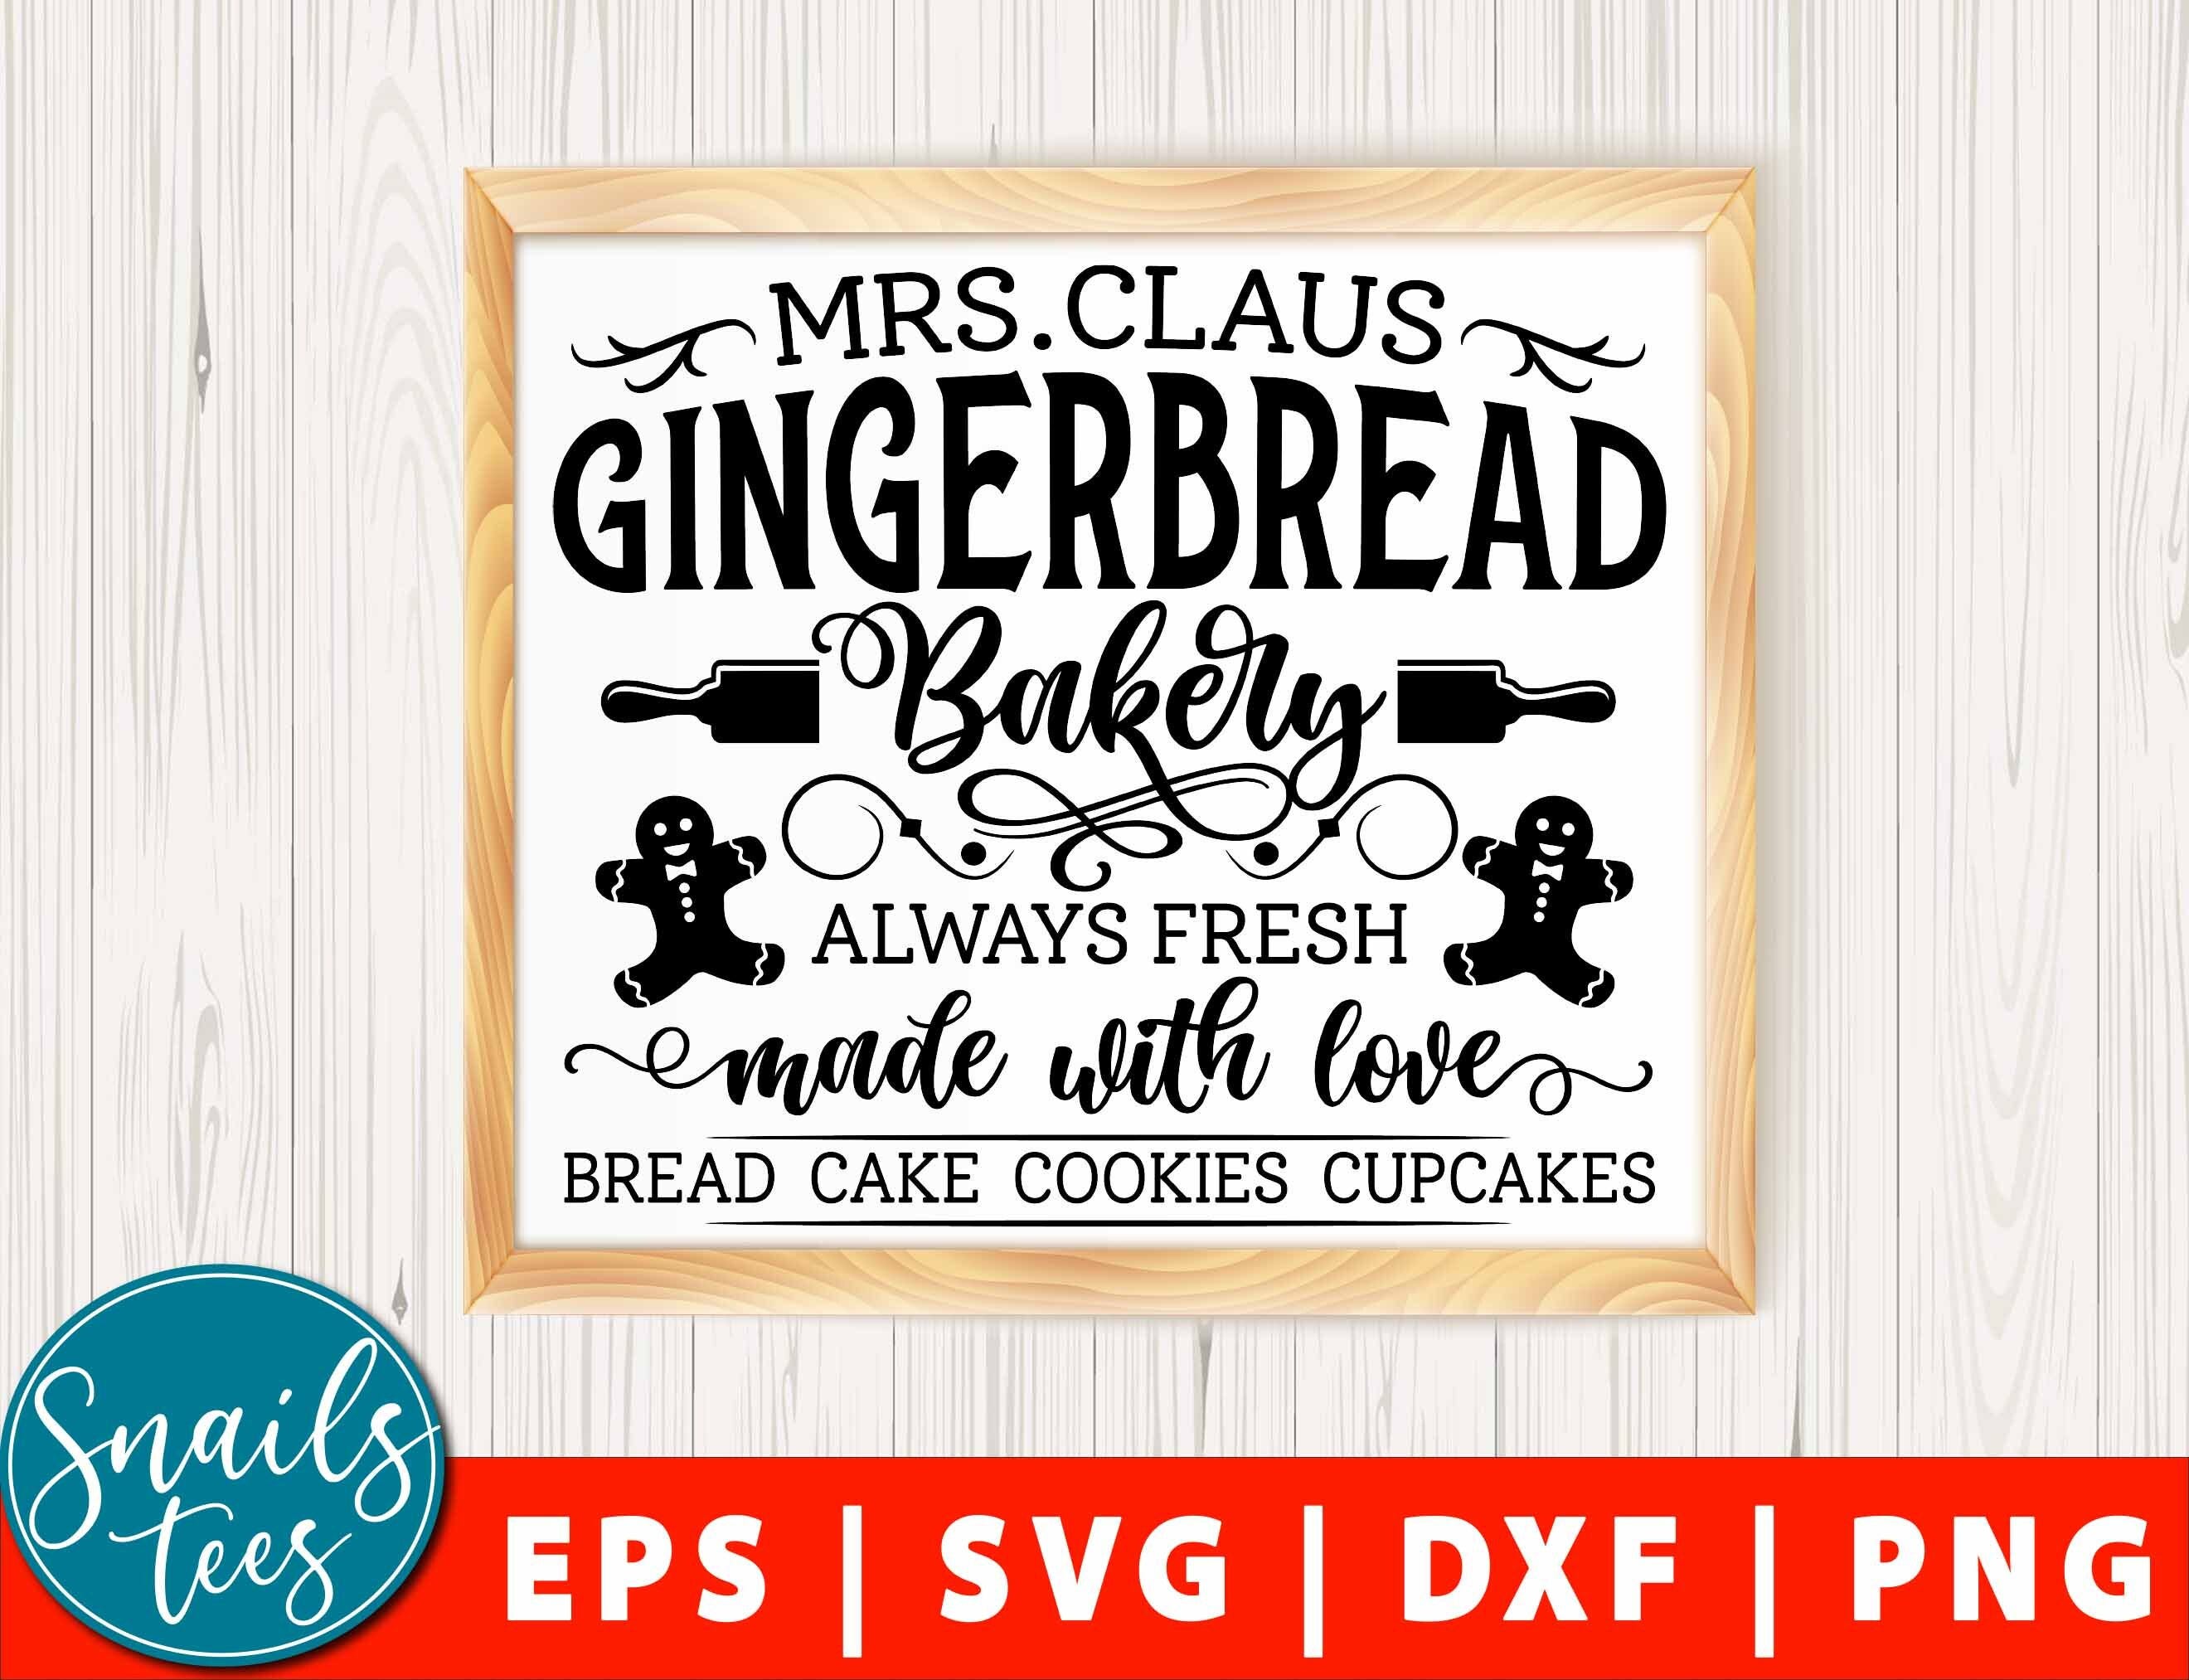 Mrs Claus Gingerbread Bakery svg eps dxf png Christmas bakery svg Farmhouse Christmas svg Rustic christmas svg Holiday svg Cut File Cricut